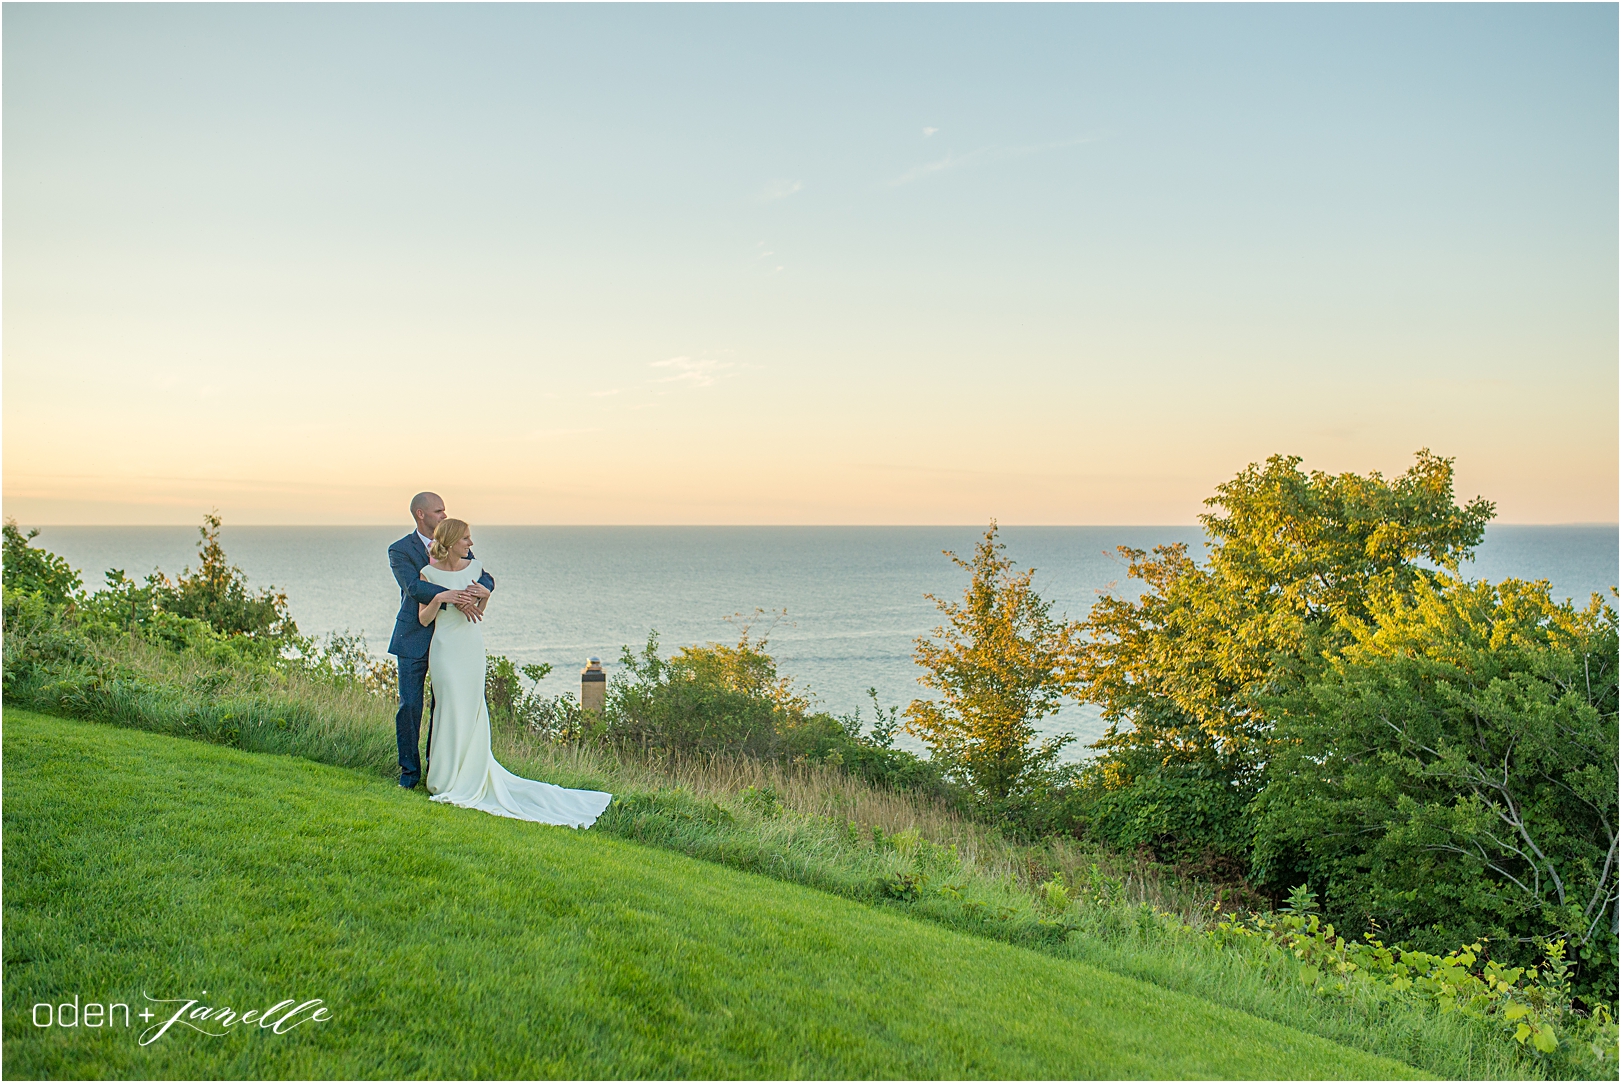 Jillian + Brian | Oden and Janelle Photography 2016 |ODE_3296|26-1.jpg